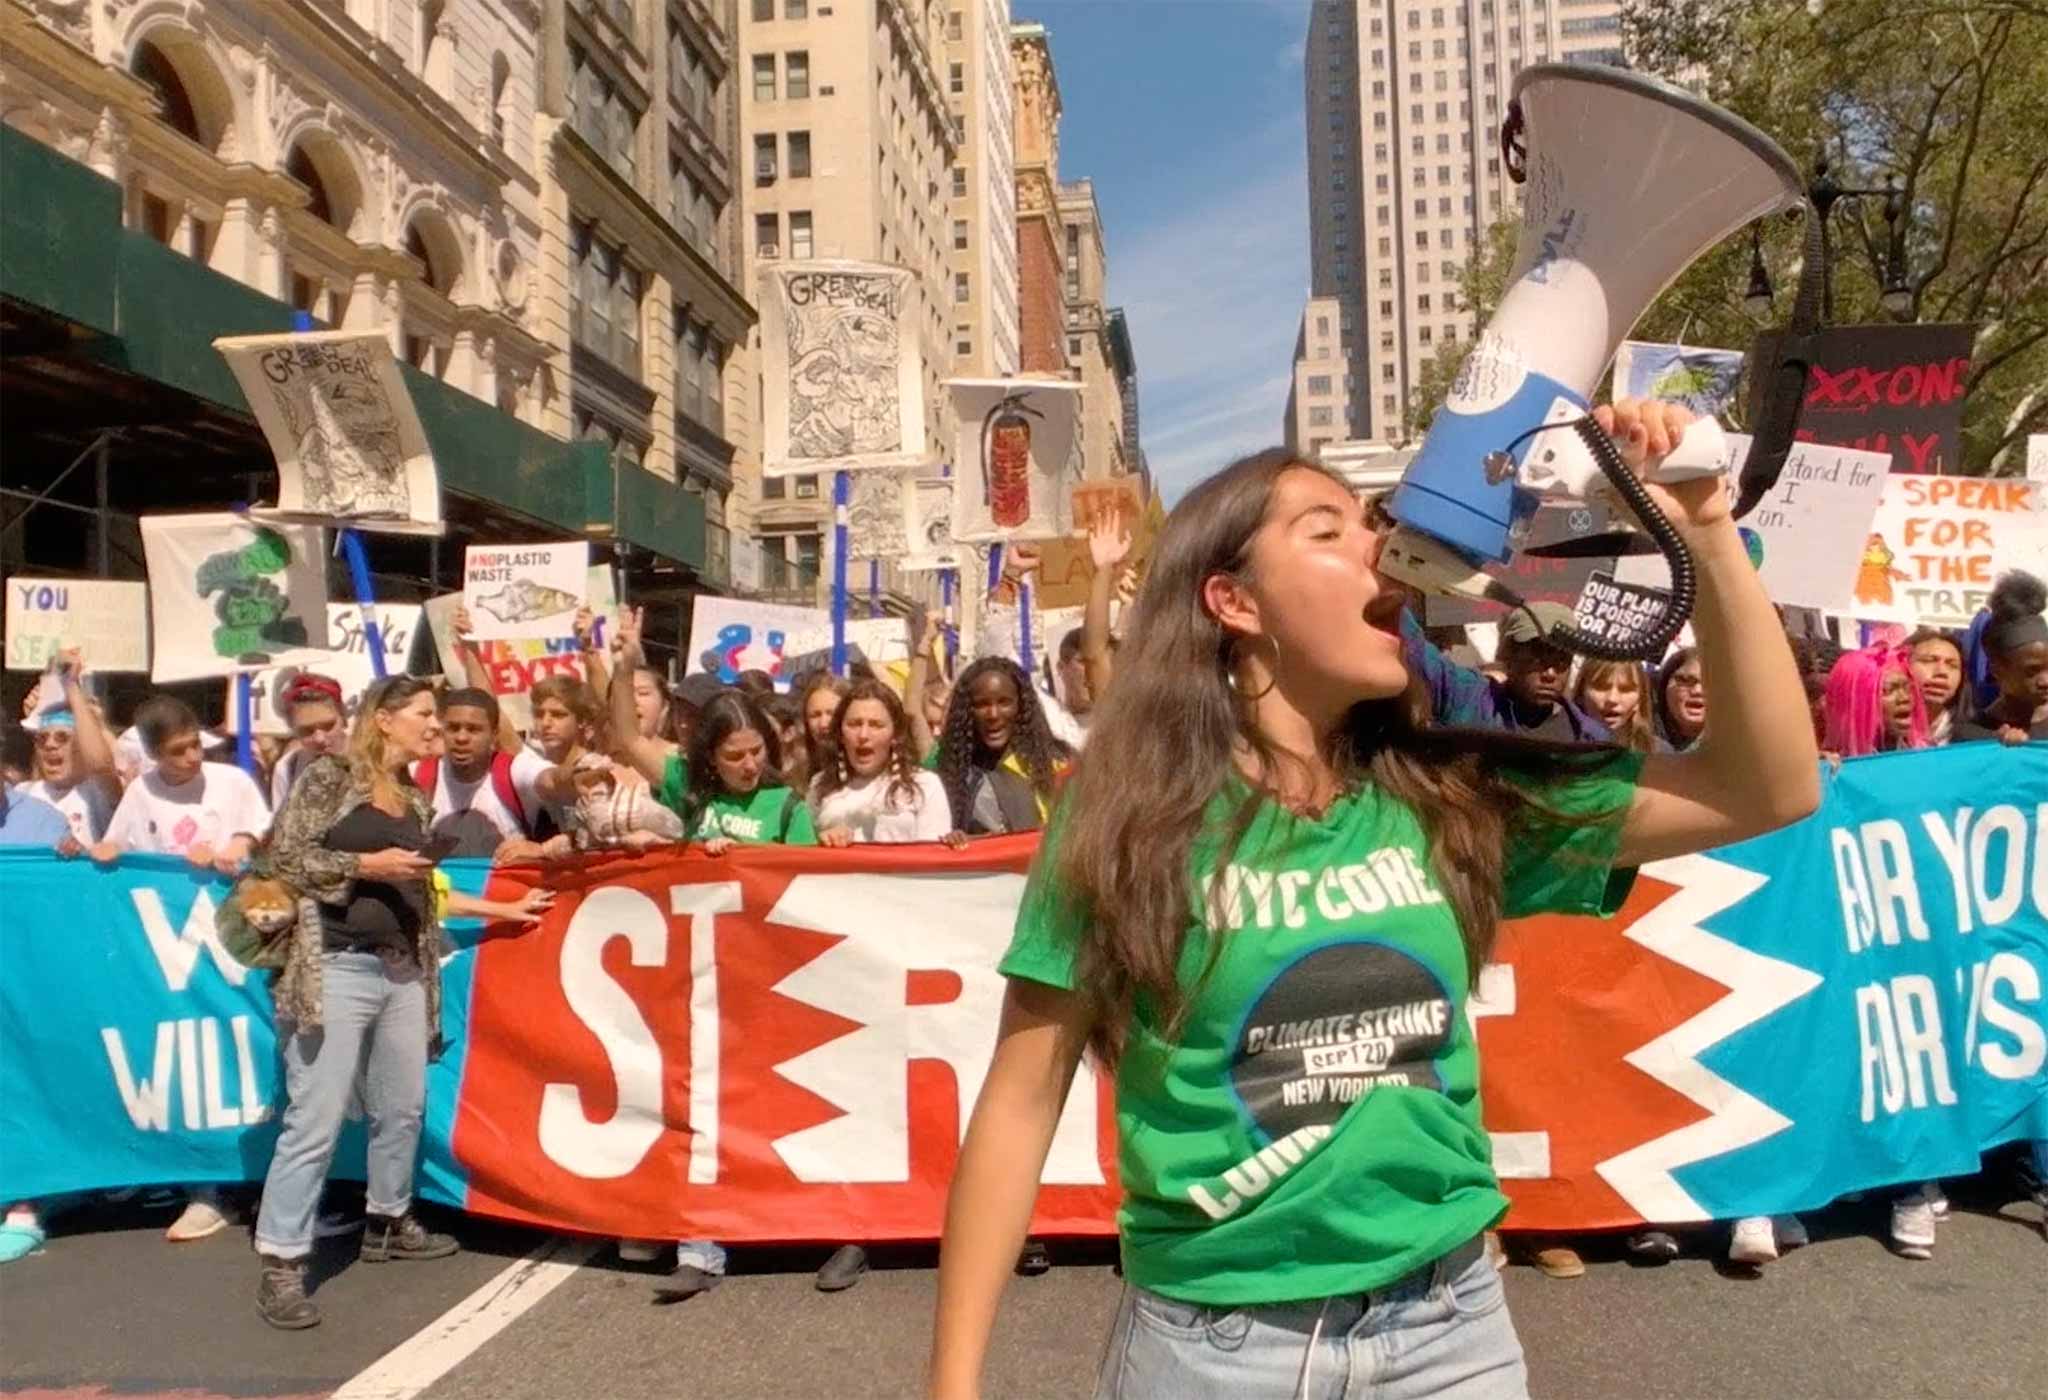 Indigenous American climate justice activist Xiye Bastida shouts into a megaphone in front of a large-scale protest